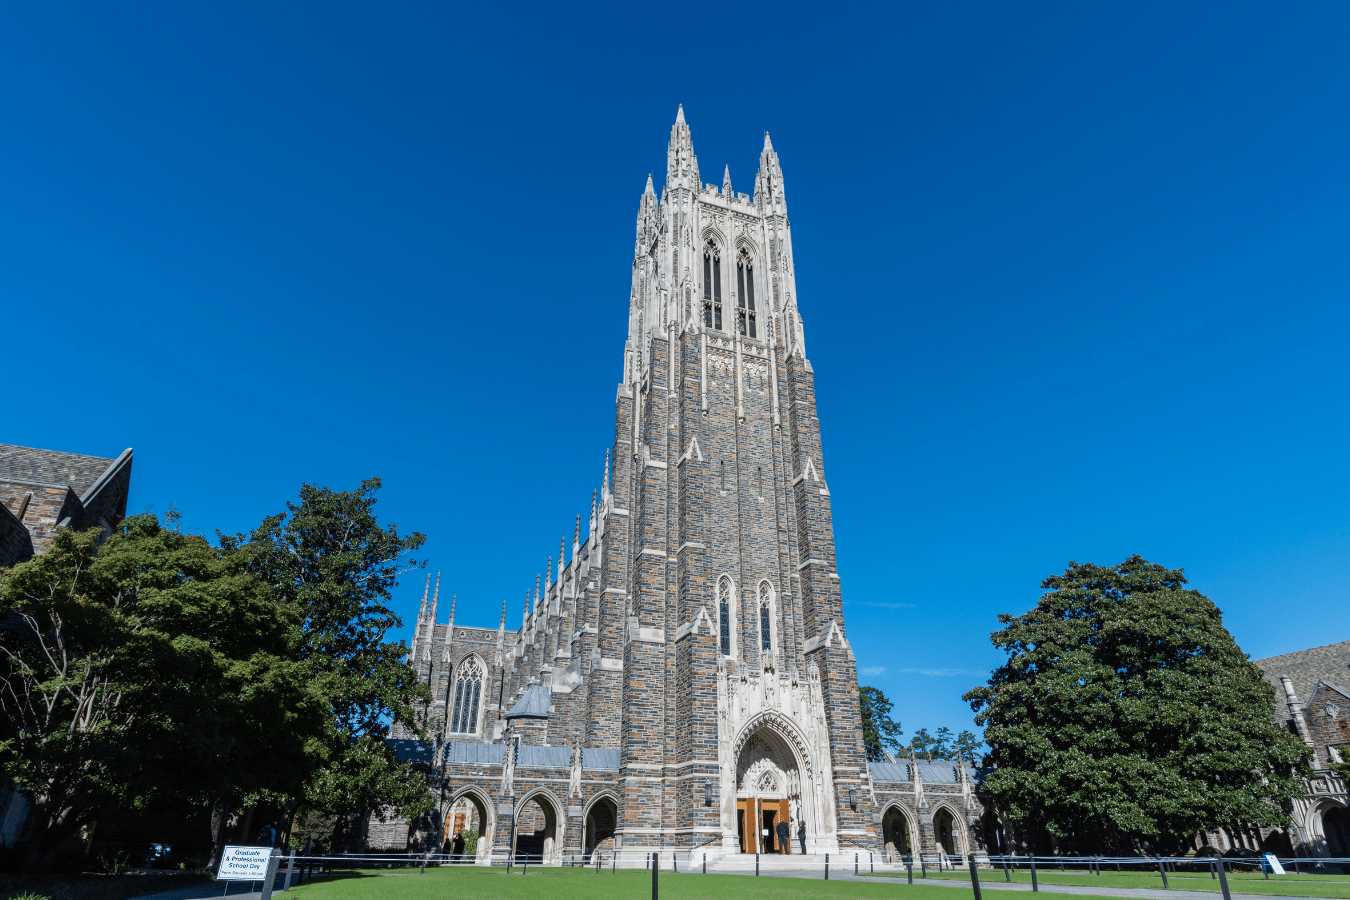 Duke University Tower on a bright sunny day located in Durham, NC